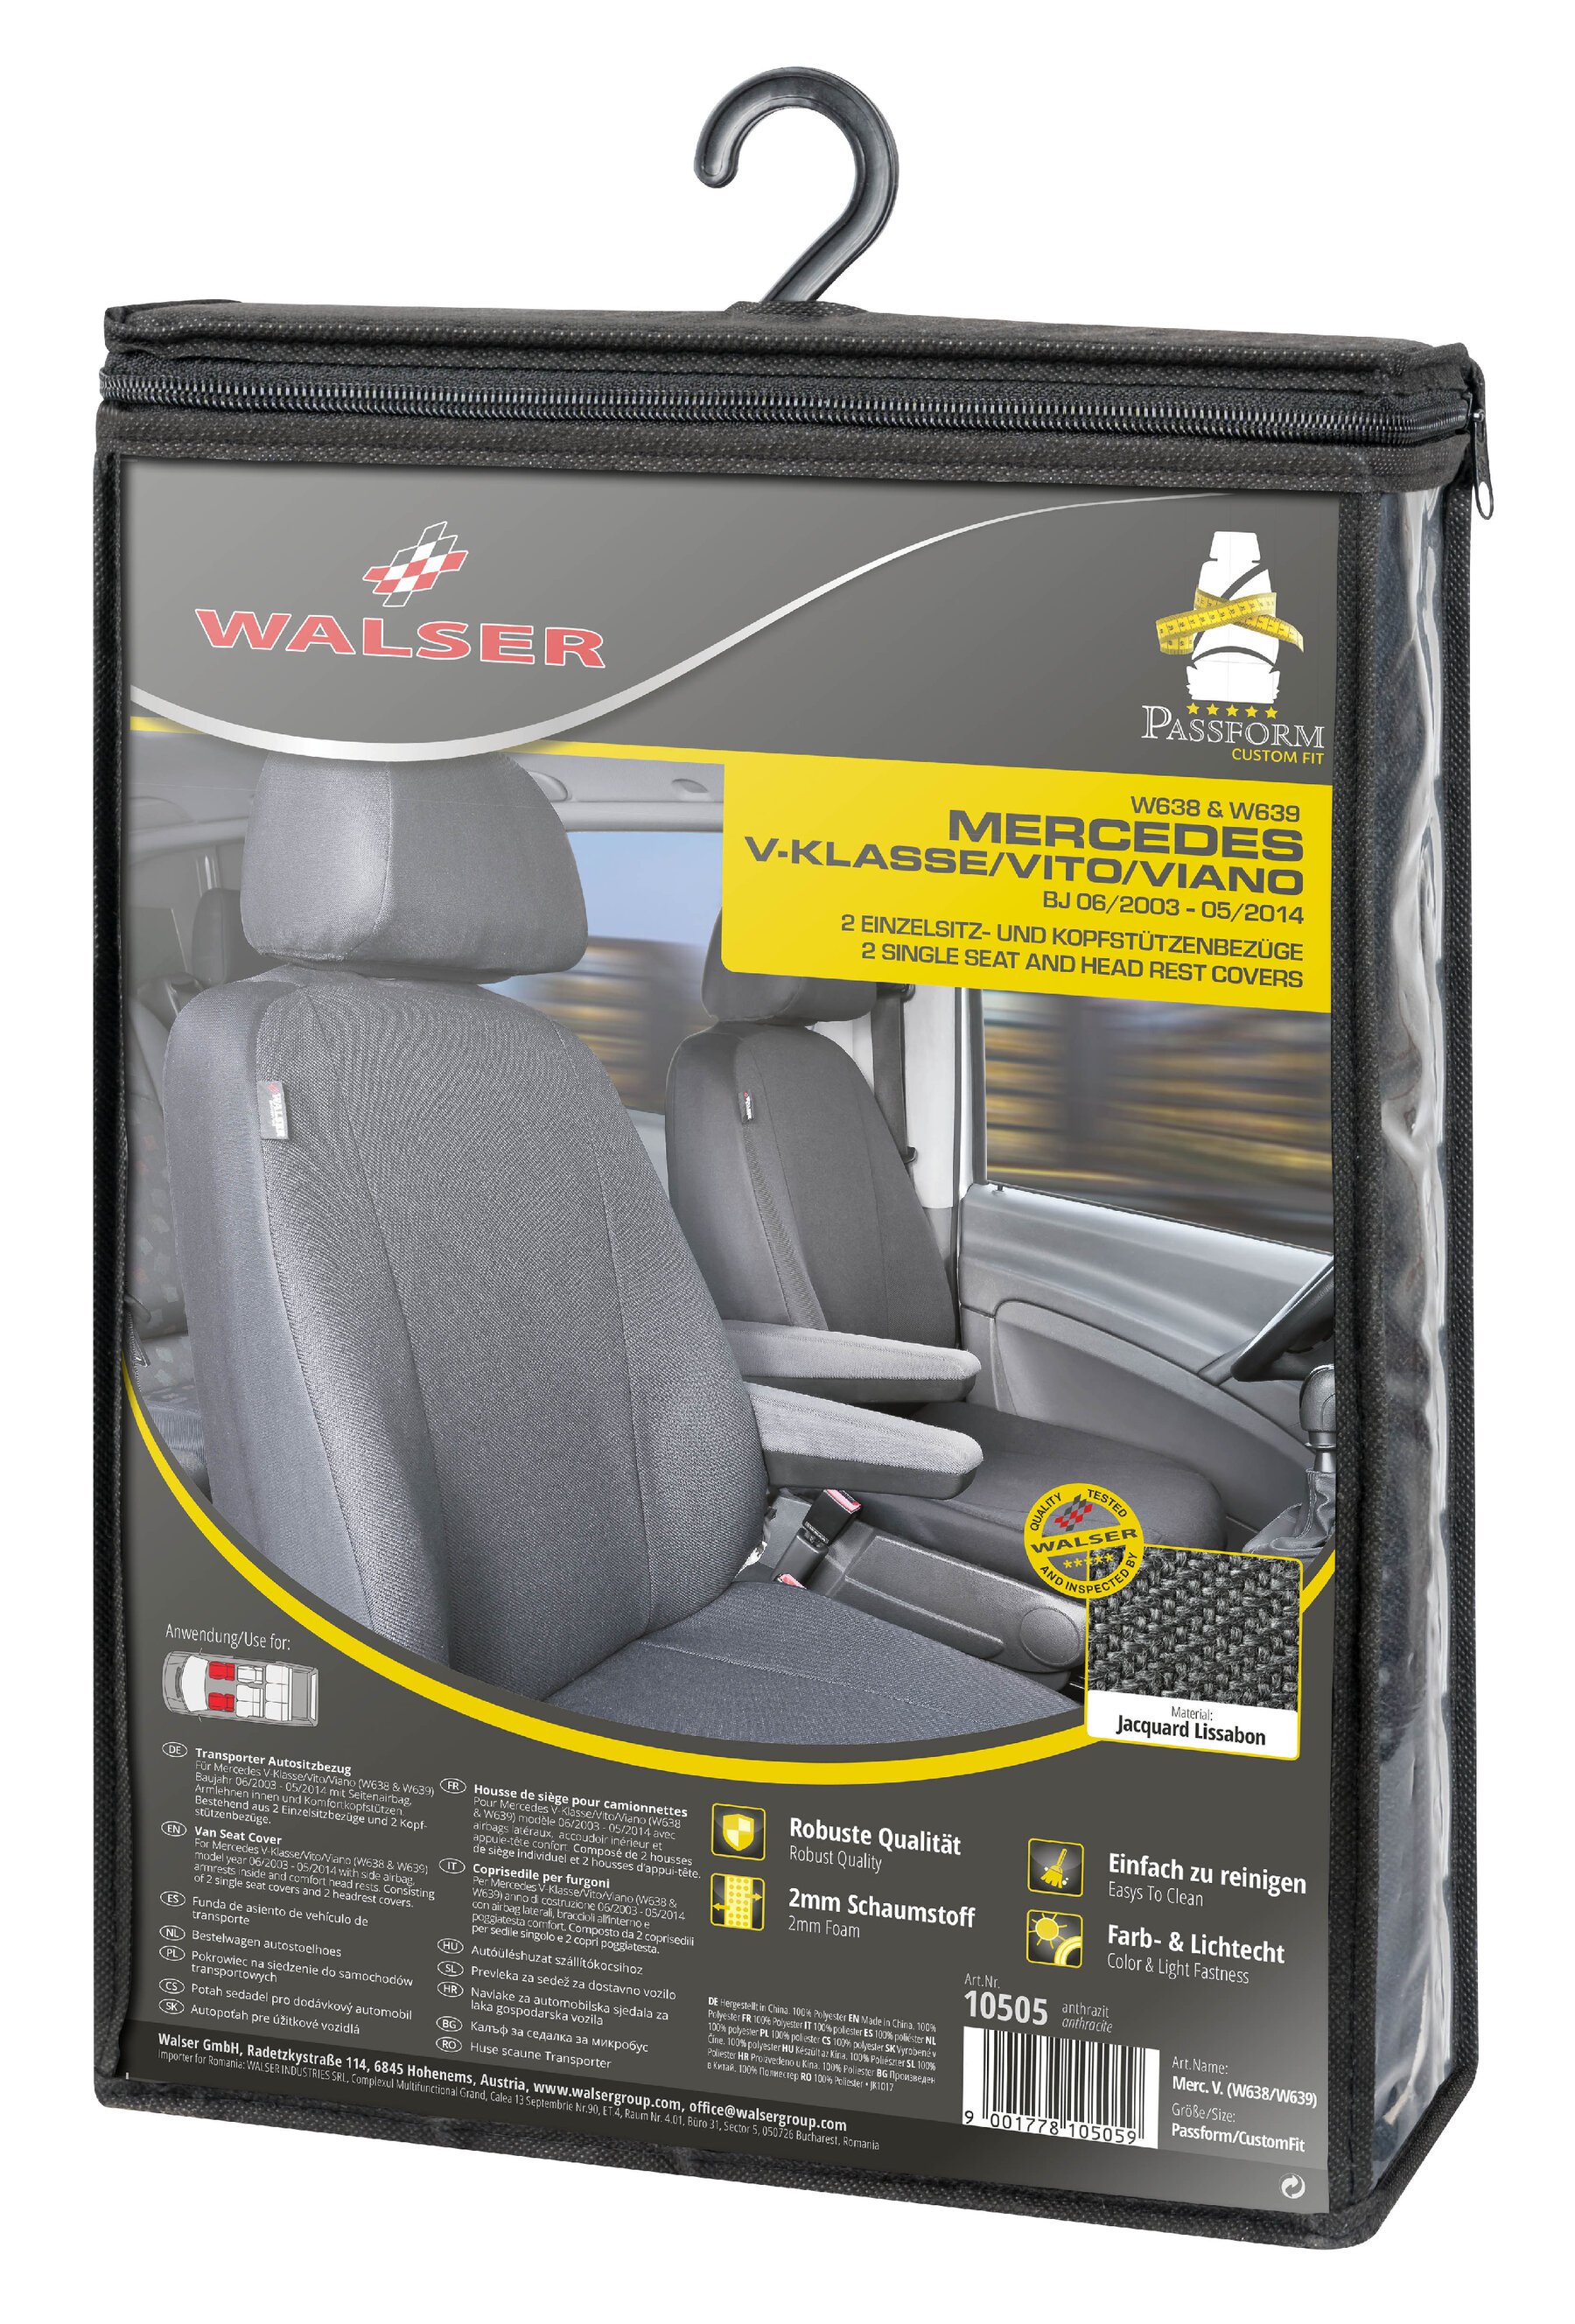 Seat cover made of fabric for Mercedes Vito/Viano, 2 single seat covers for armrest inside